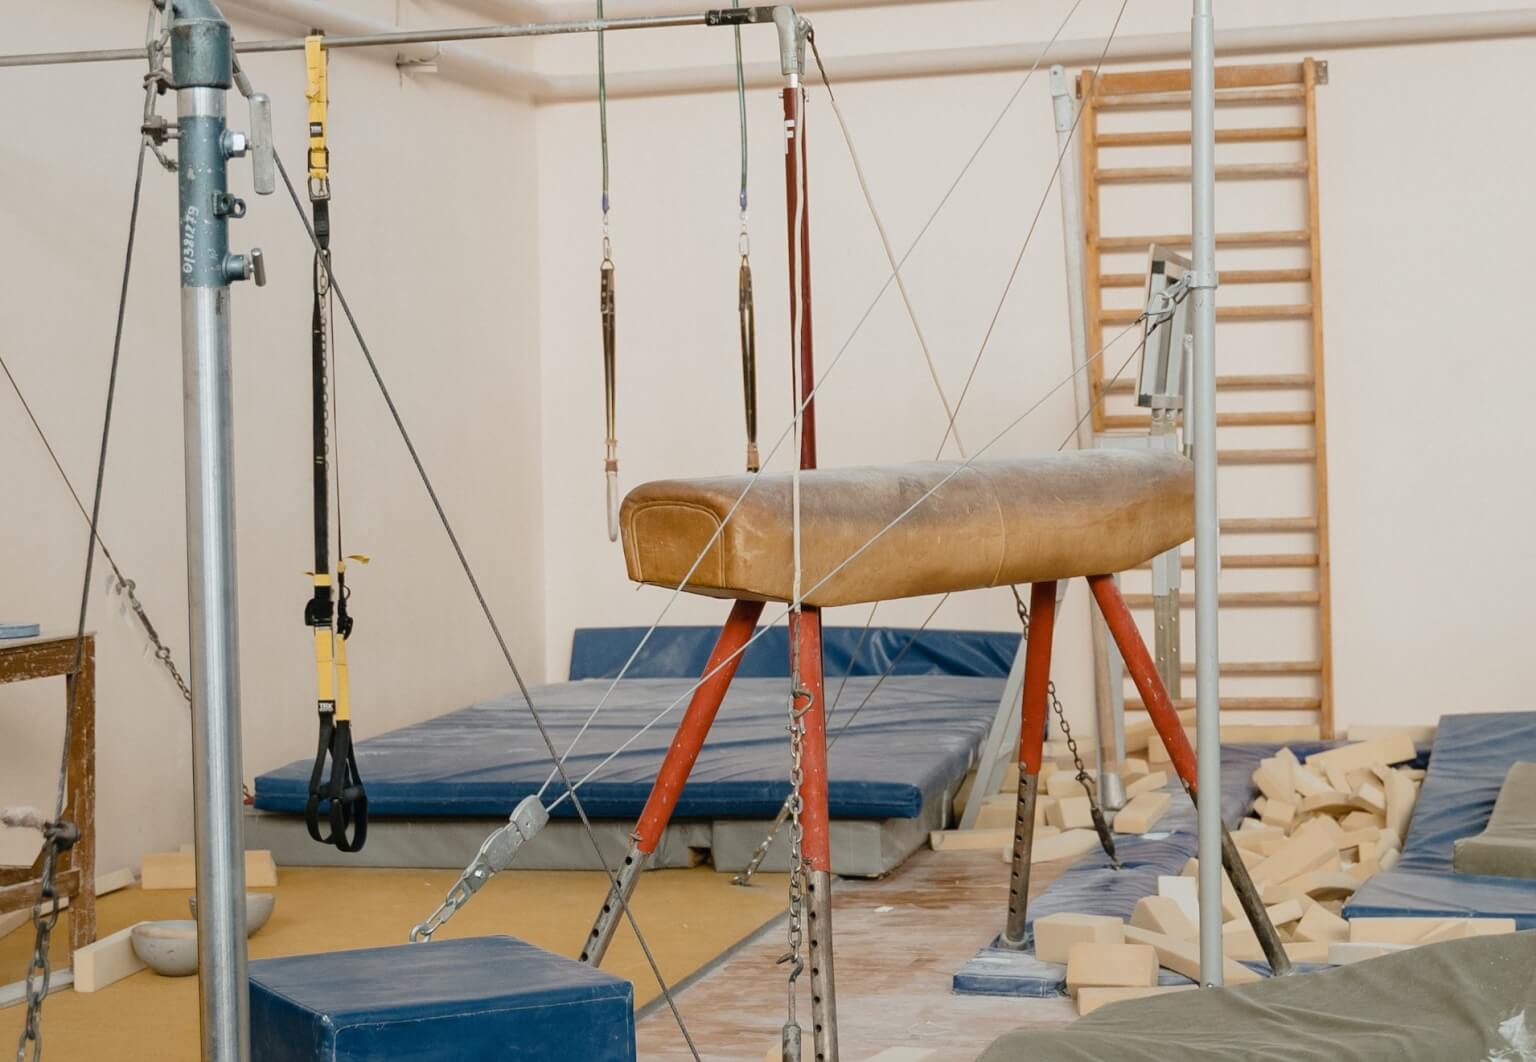 The Gymnastics Equipment You Need To Start Your Gym - The Studio